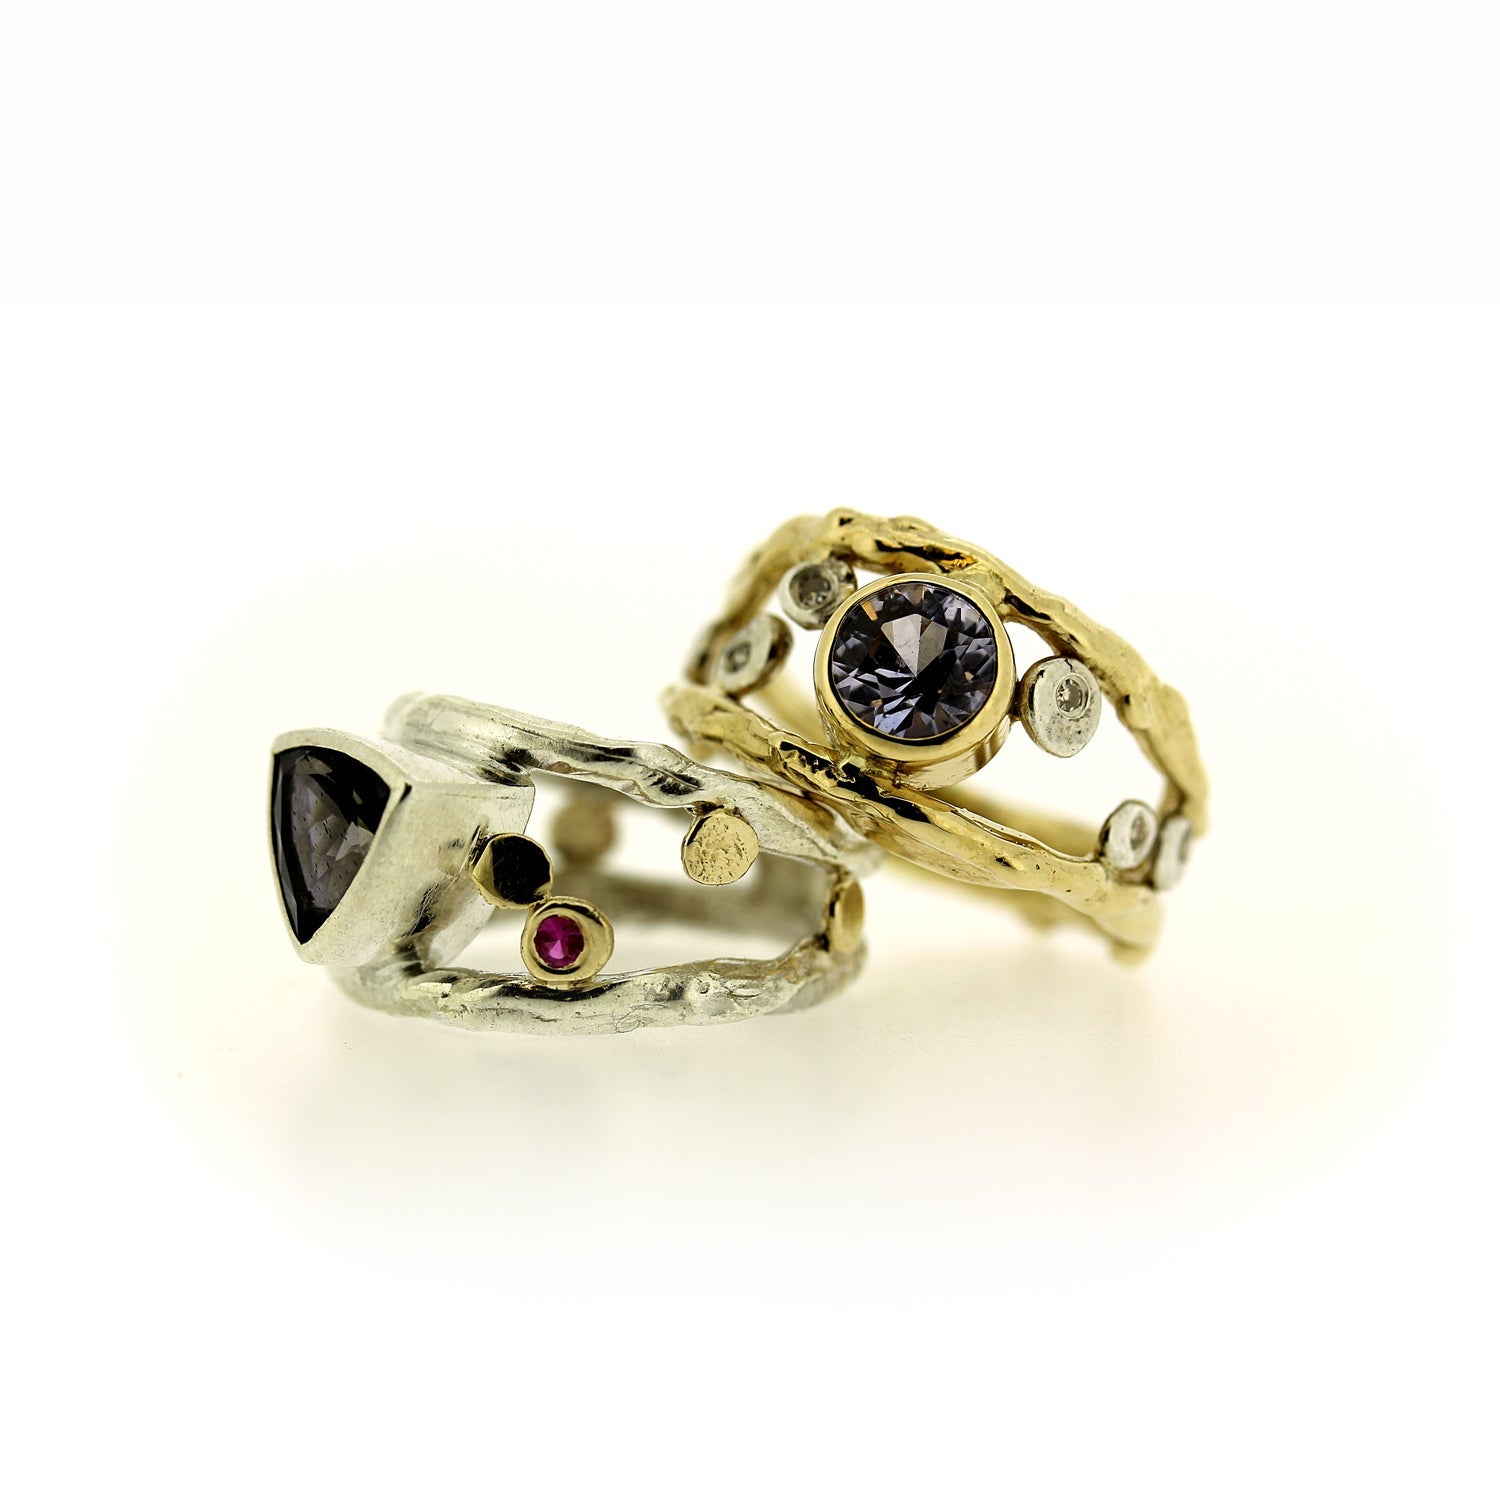 Rings in Sapphire and Iolite with Diamonds and Rubies, stacked, by Katie Poterala Jewelry Studio